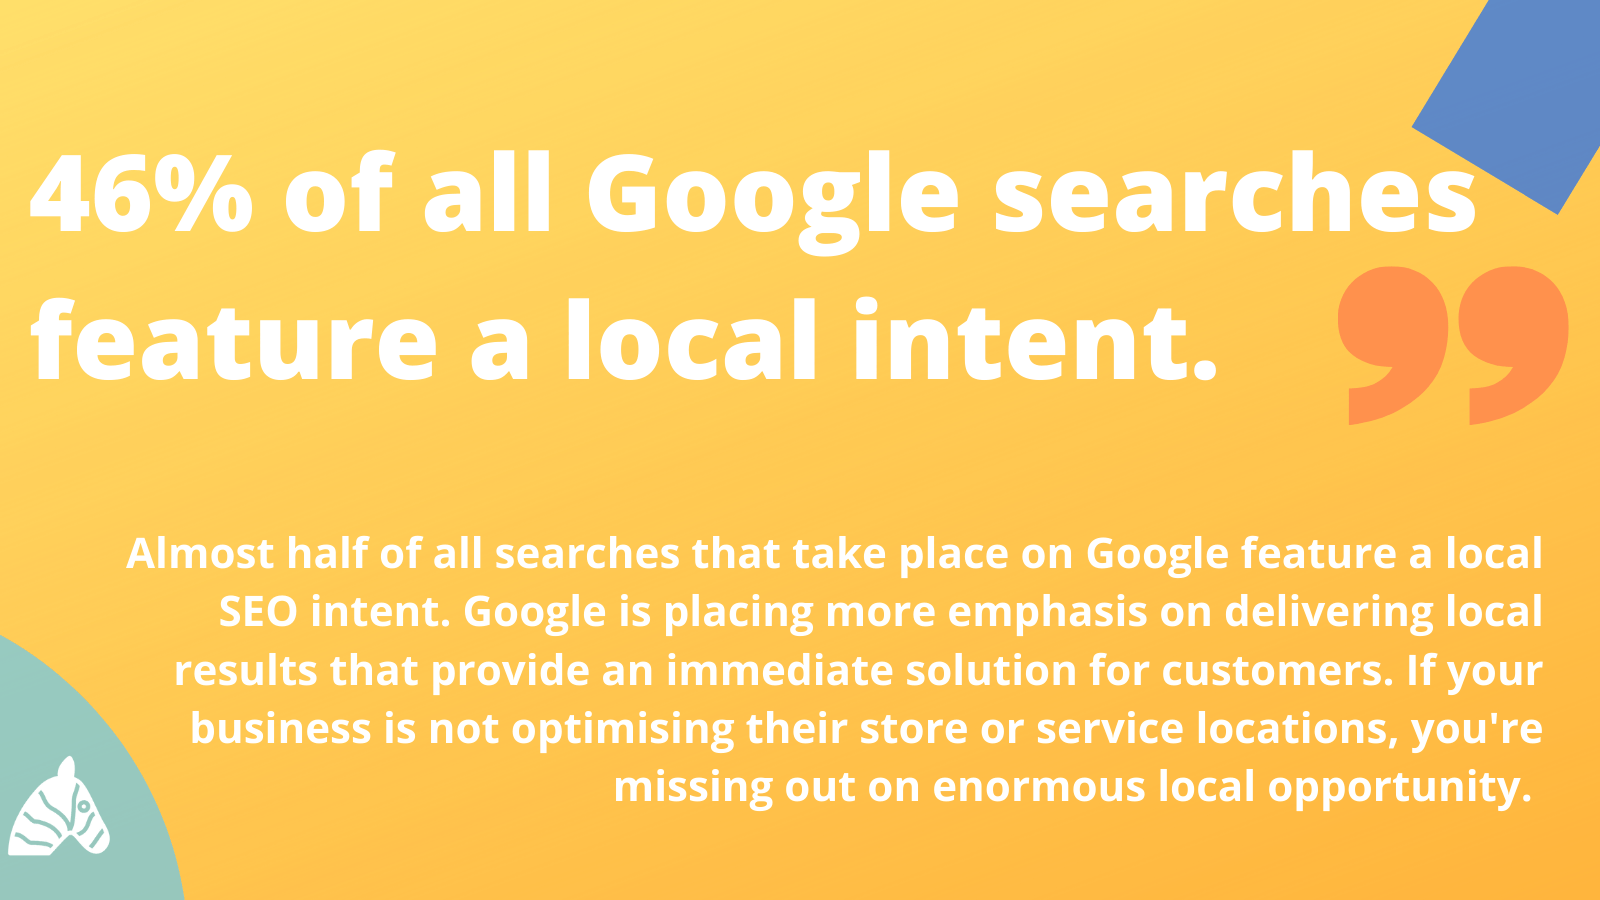 46% of all Google searches feature a local intent statistic